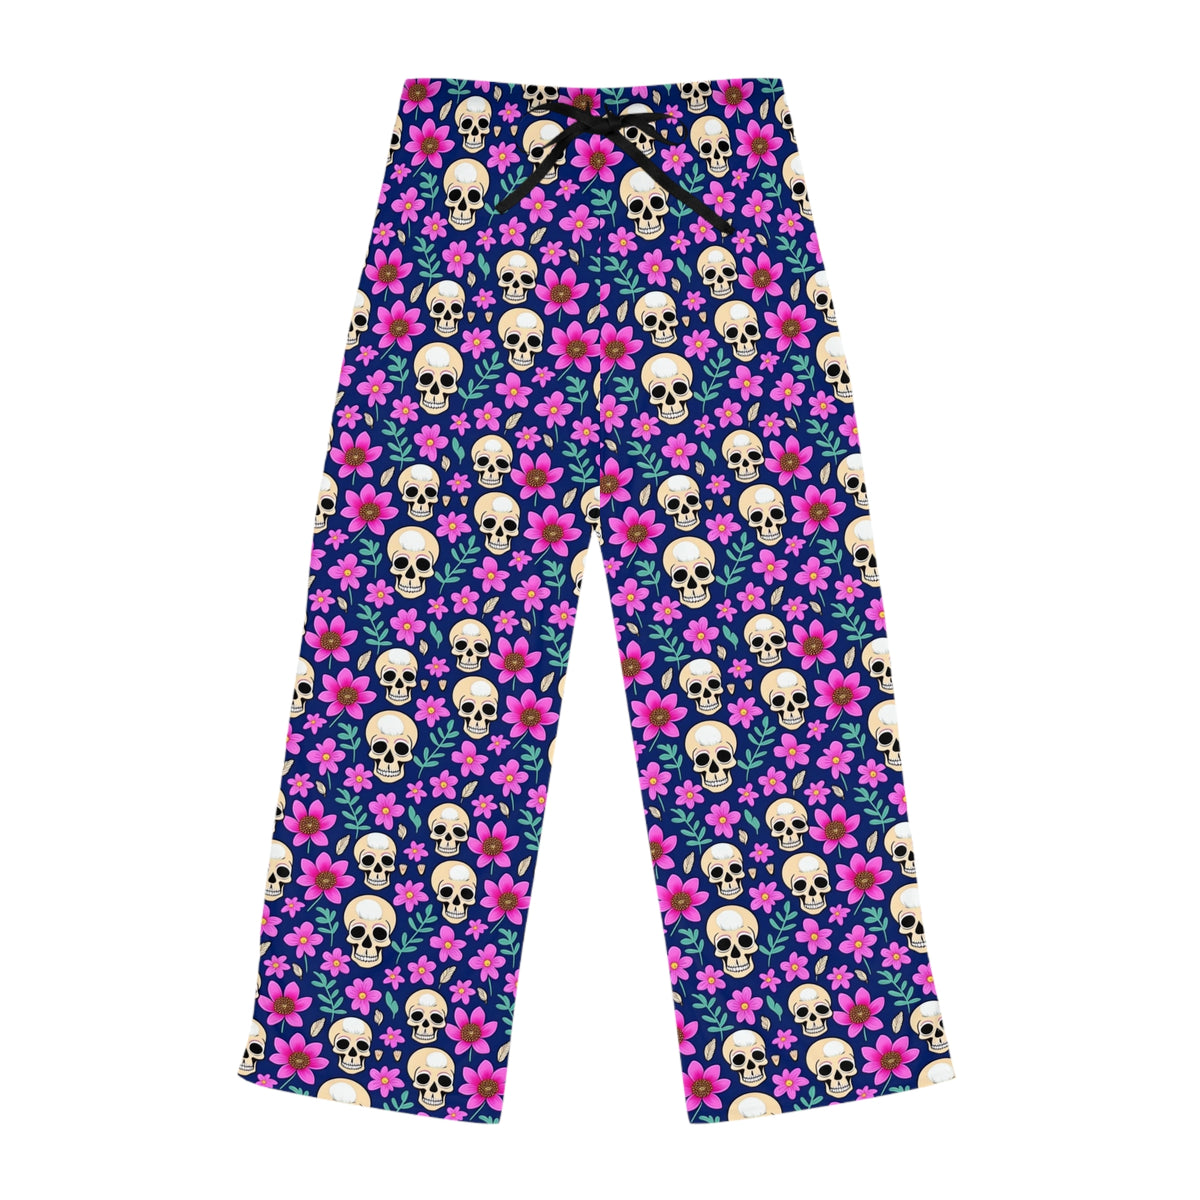 Floral Skull All Over Print Women's Pajama Pants